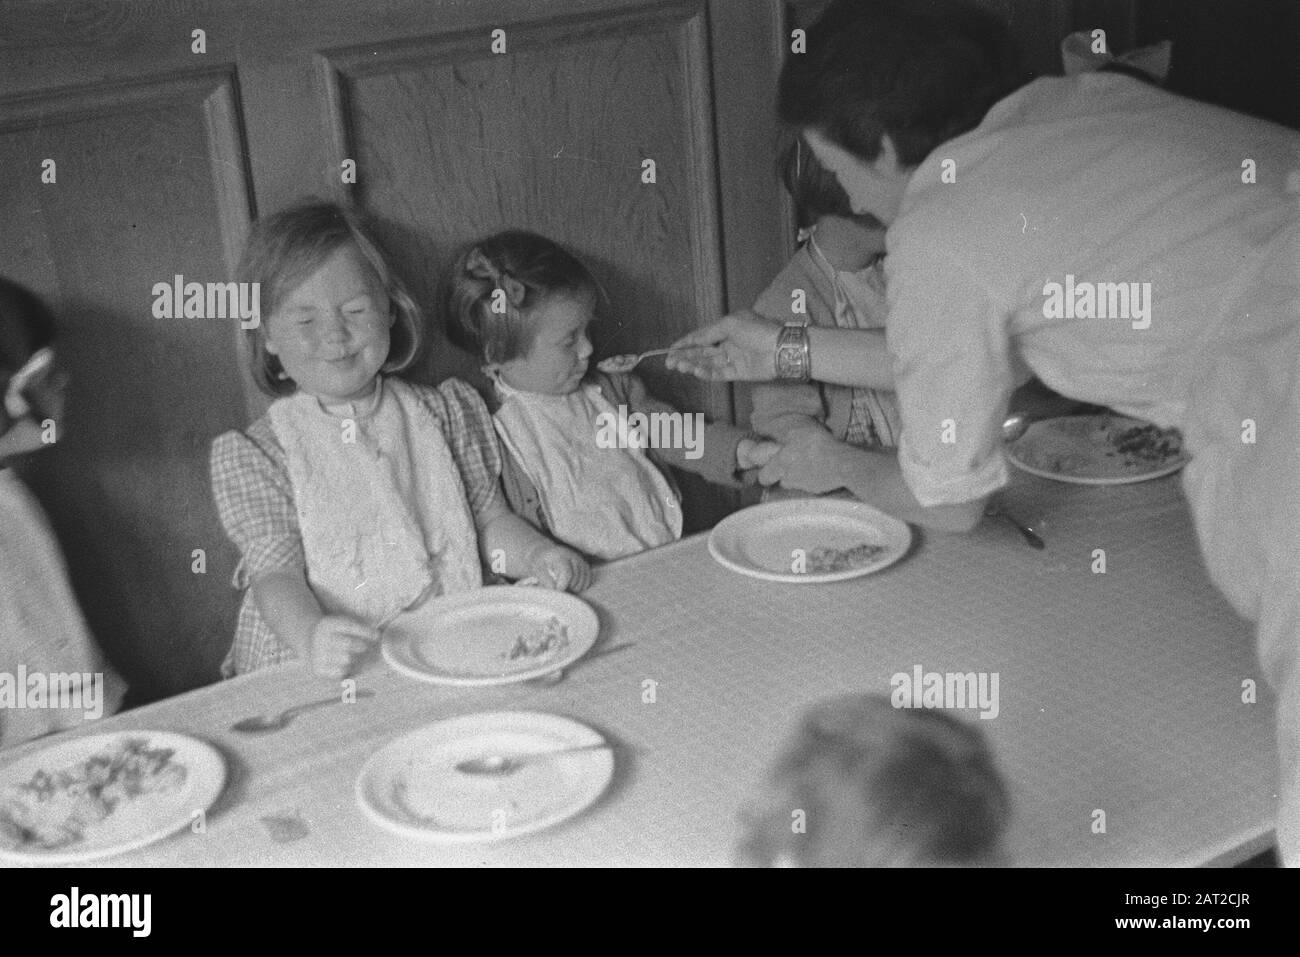 [Photo series childcare cq childcare] Eat it all up and you will be a big girl Date: June 1943 Location: Great Britain Keywords: food, children, childcare, World War II Stock Photo